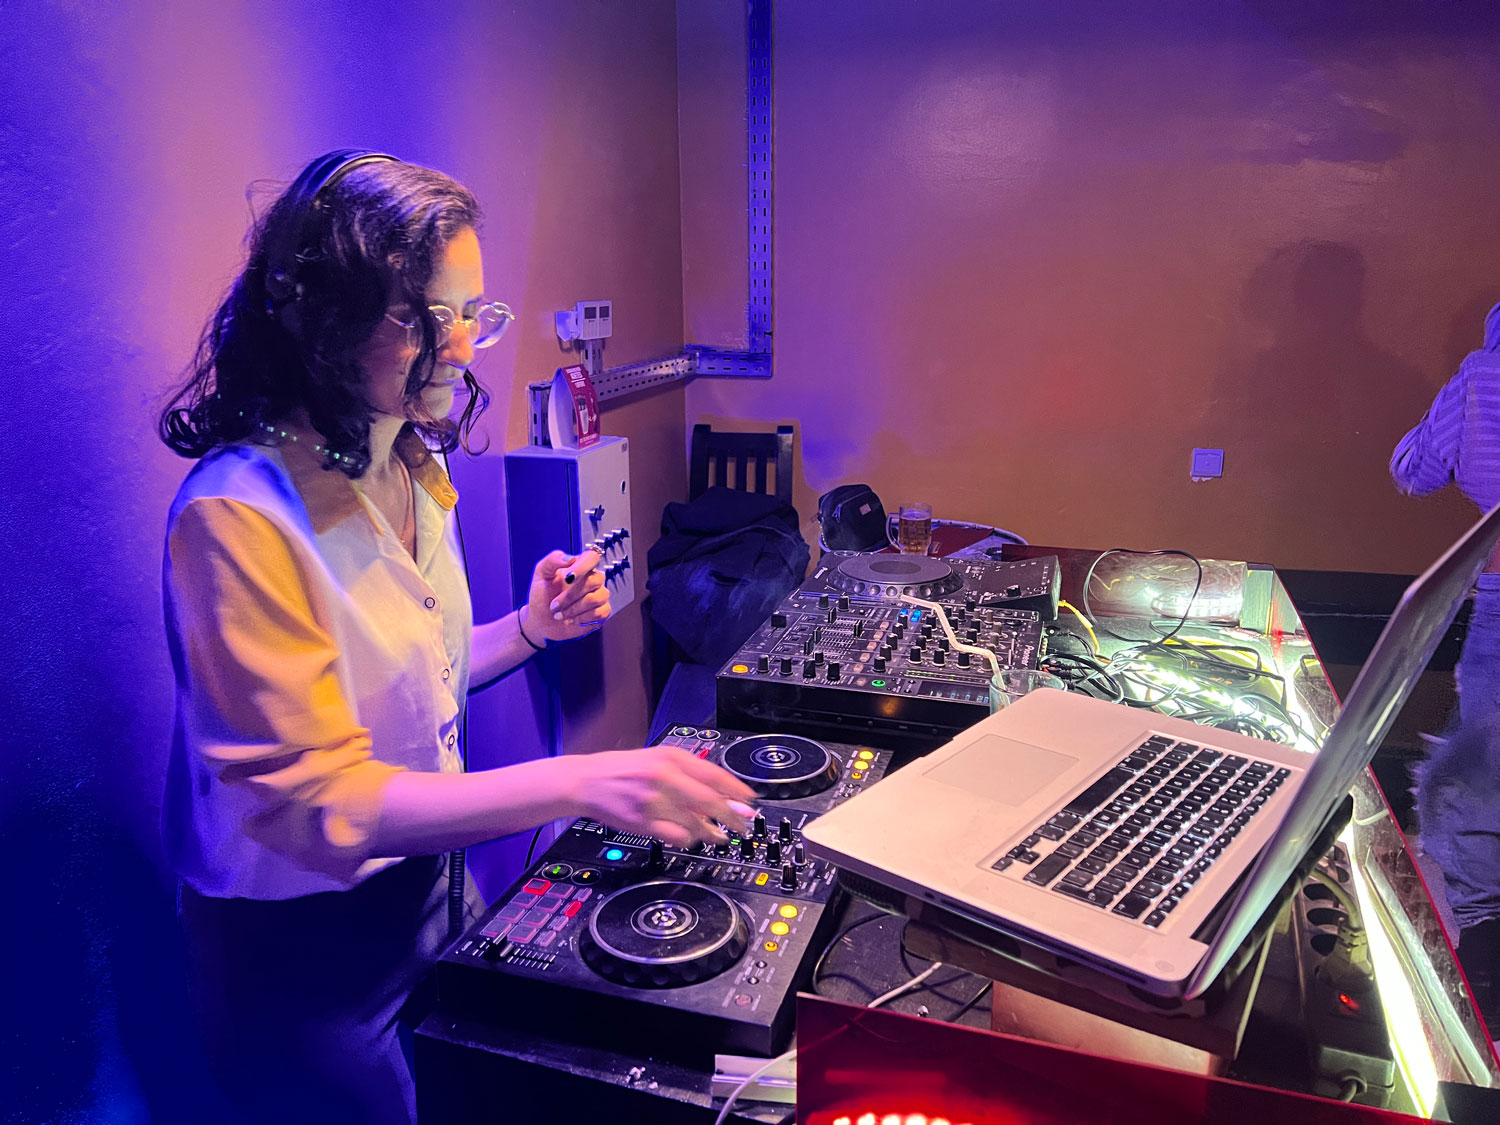 Female DJ shown with a deck and laptop in a music studio.